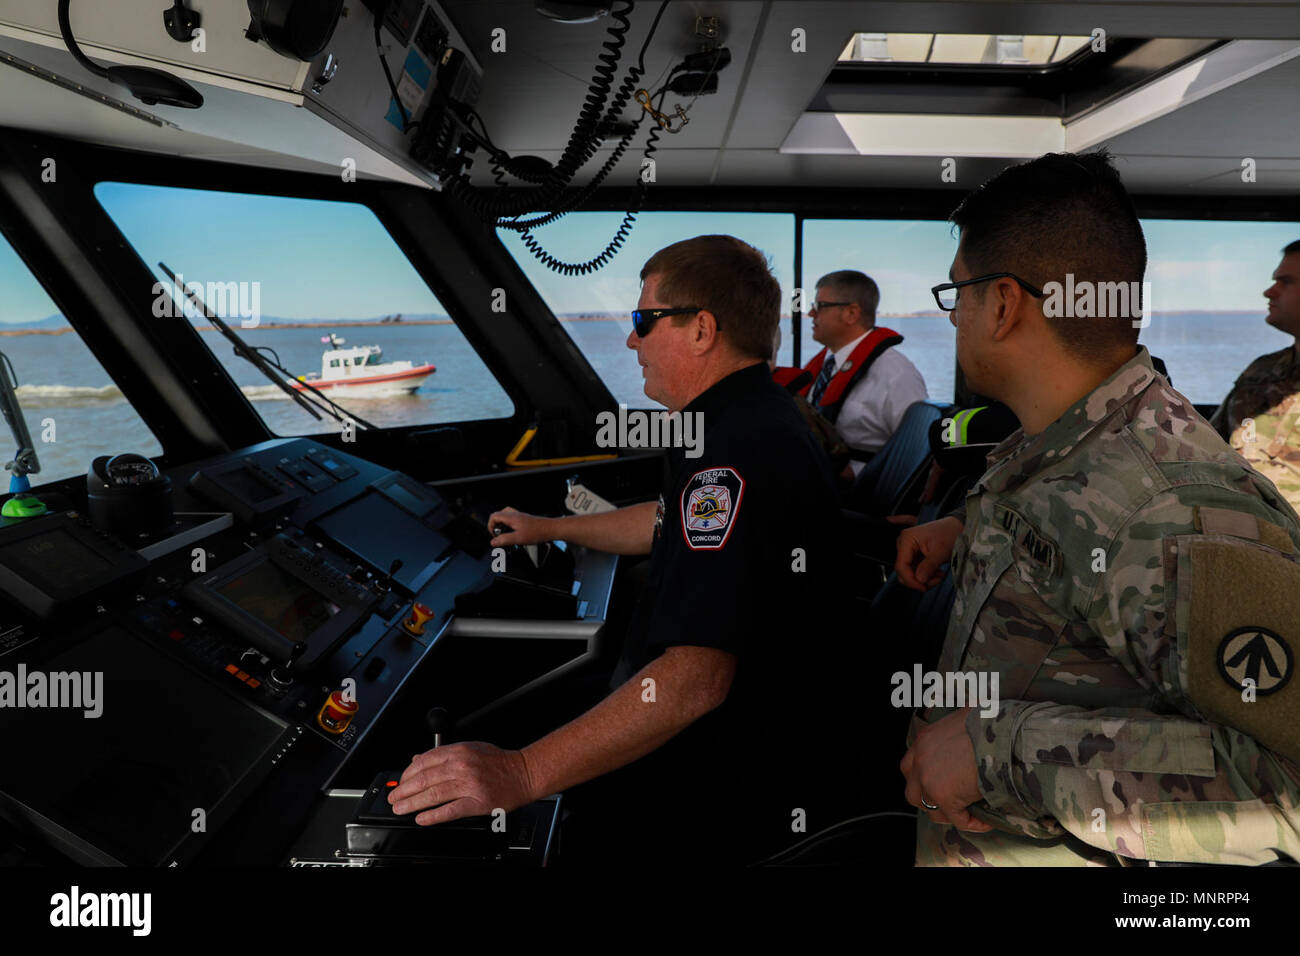 A pier-side firefighter drives one of two U.S. Army fire boats during Operation Trans Mariner 18 West at Military Ocean Terminal Concord, California, Mar. 6, 2018. Trans Mariner 18 West is a real-world strategic mission utilizing U.S. Army Reserve, National Guard and Active component Soldiers to conduct Port Operations allowing Army materiel and munitions containers for travel onward. Stock Photo